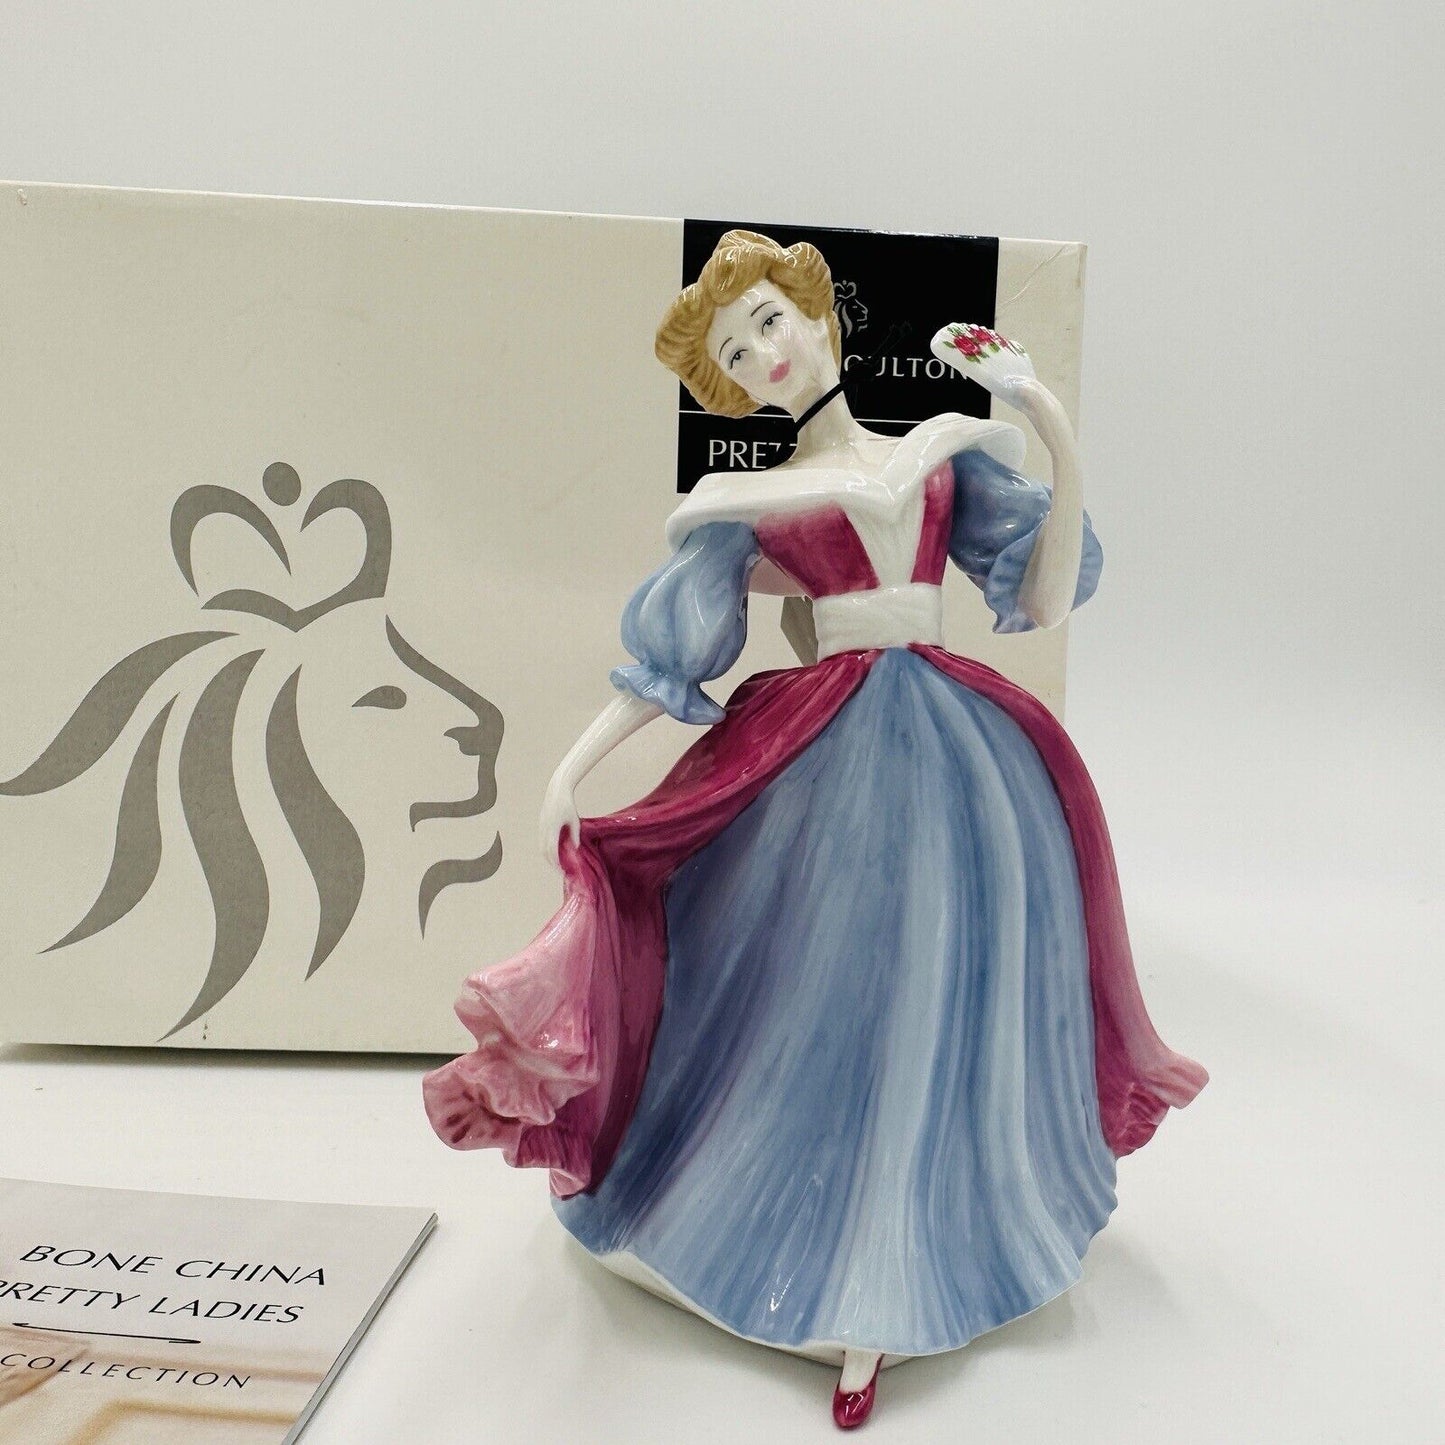 Royal Doulton Amy Figurine 2004 Figure of the Year Signed Boxed HN4782